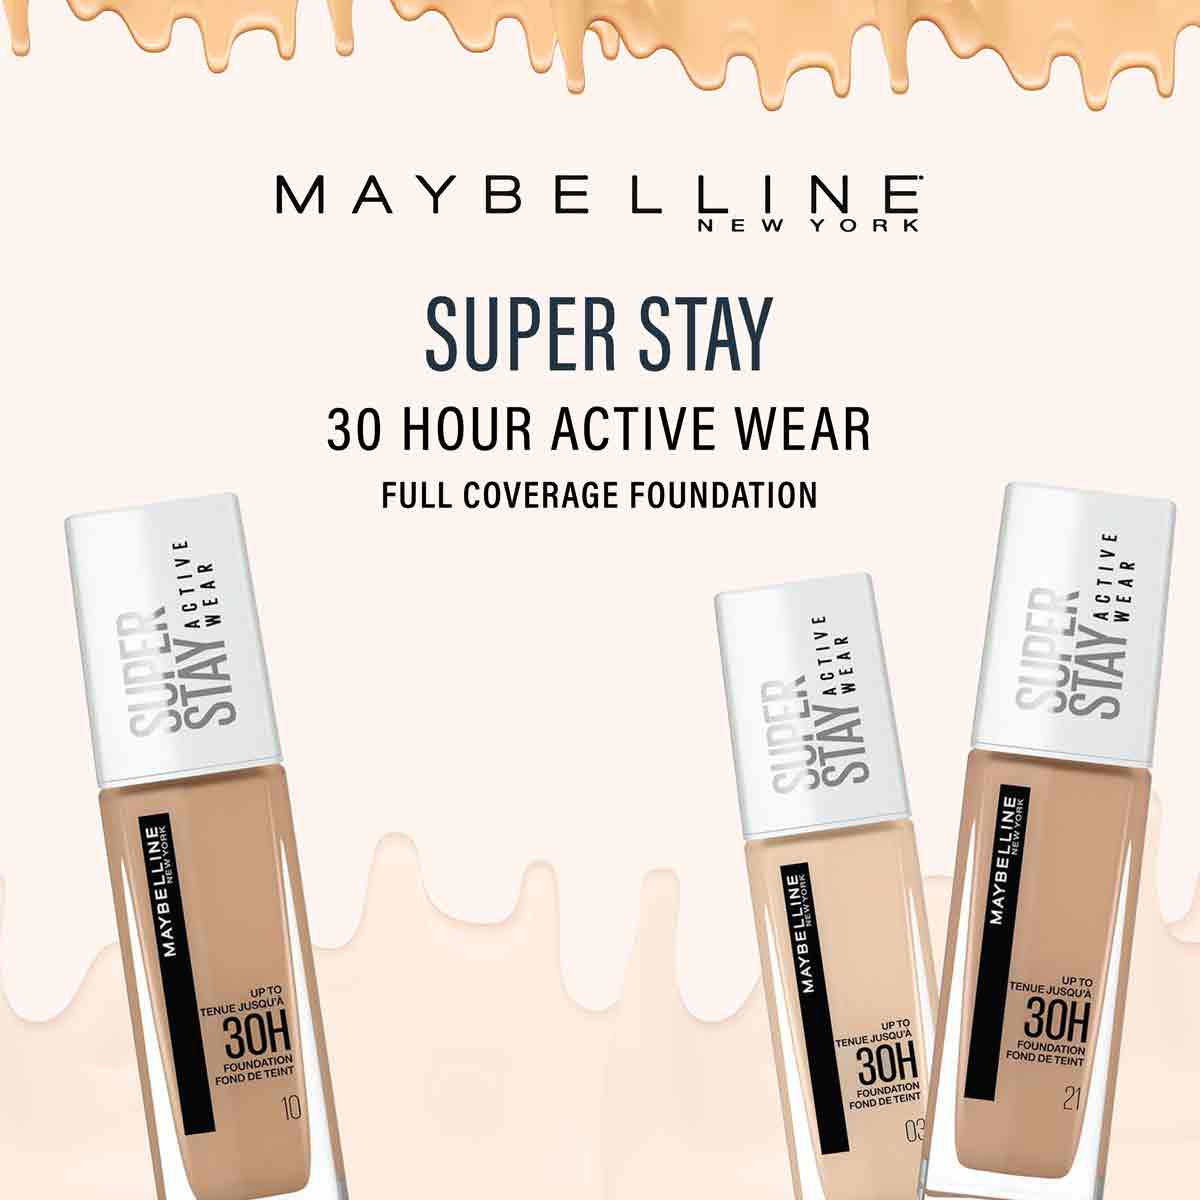 Maybelline Superstay 30 Hour Active Wear Full Coverage Foundation